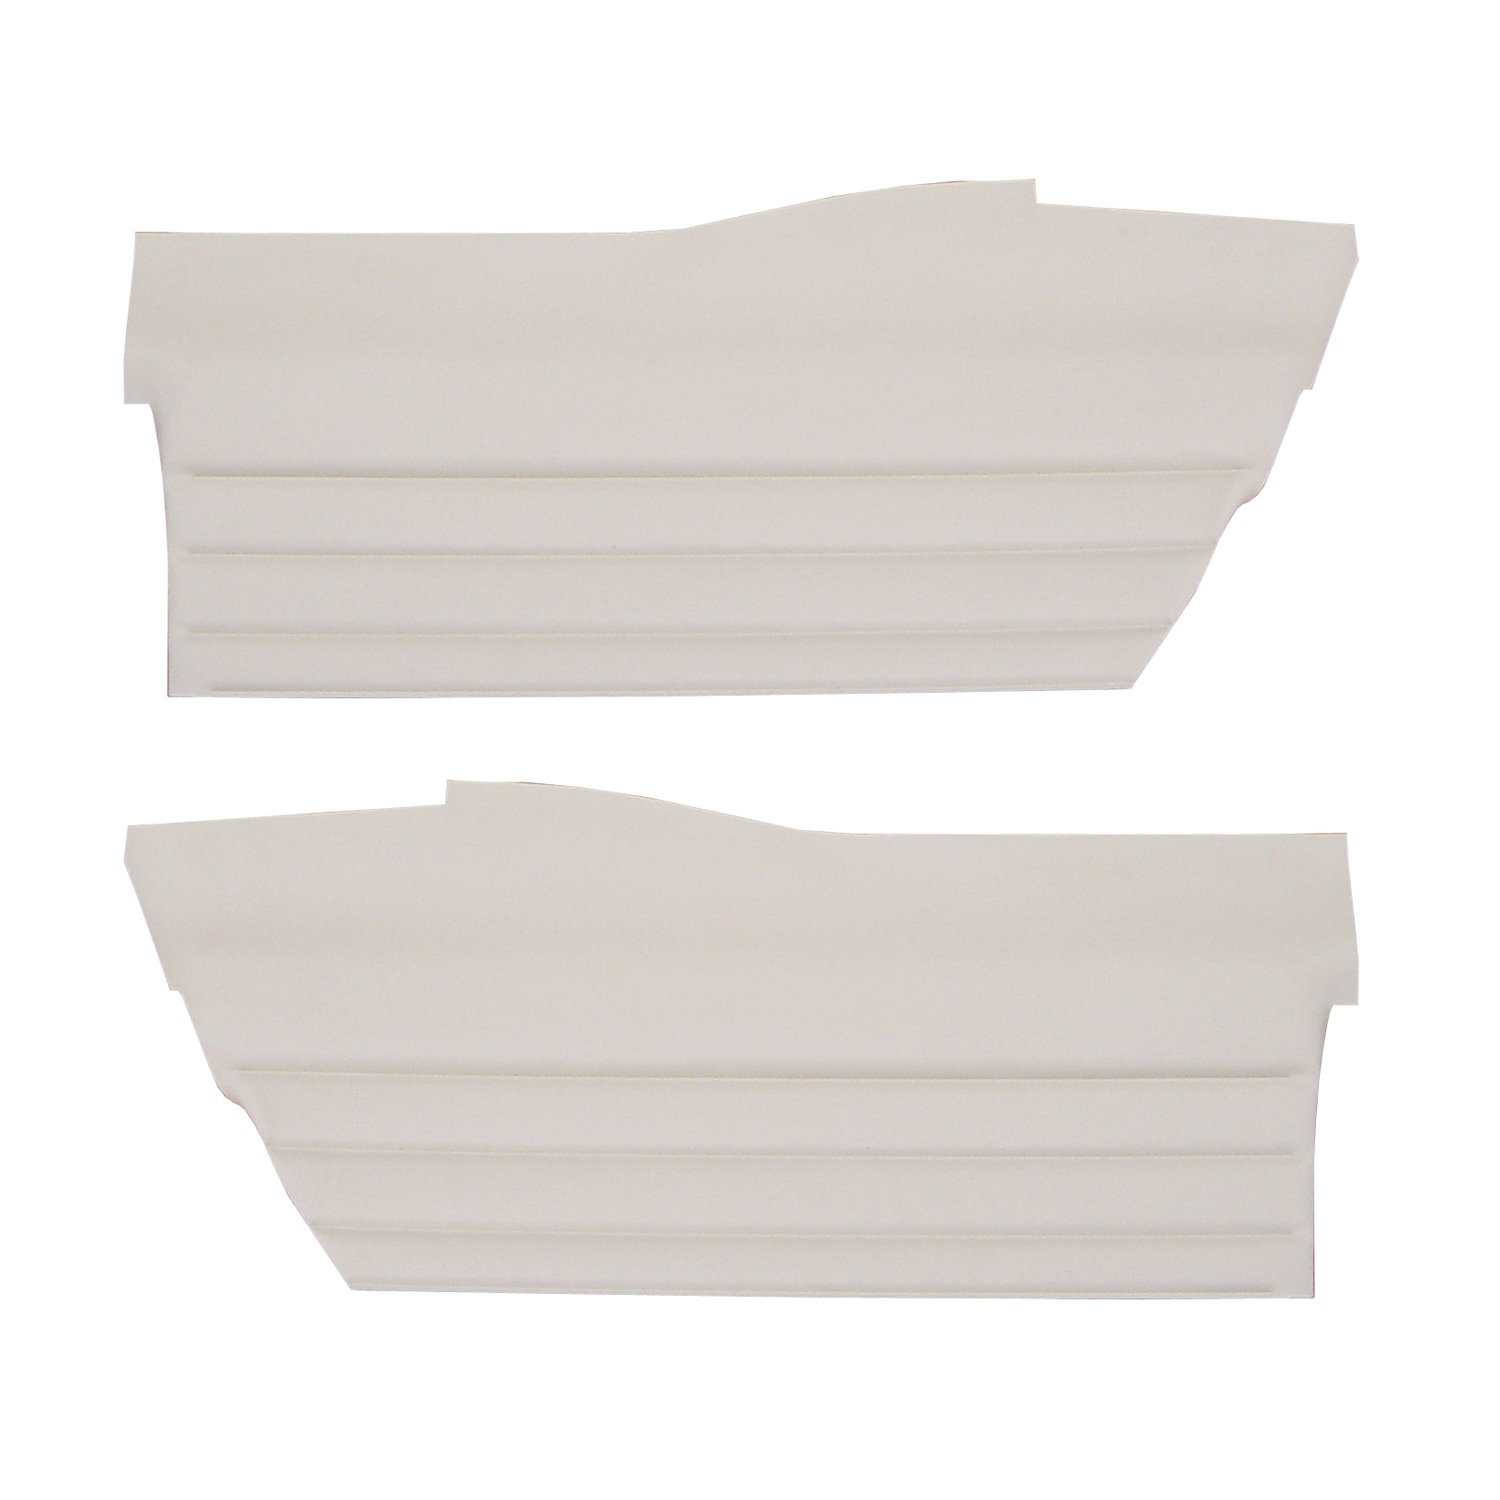 DO67GUD0048240G 67 CUTLASS SUPREME/442 HOLIDAY COUPE REAR PANELS - PARCHMENT